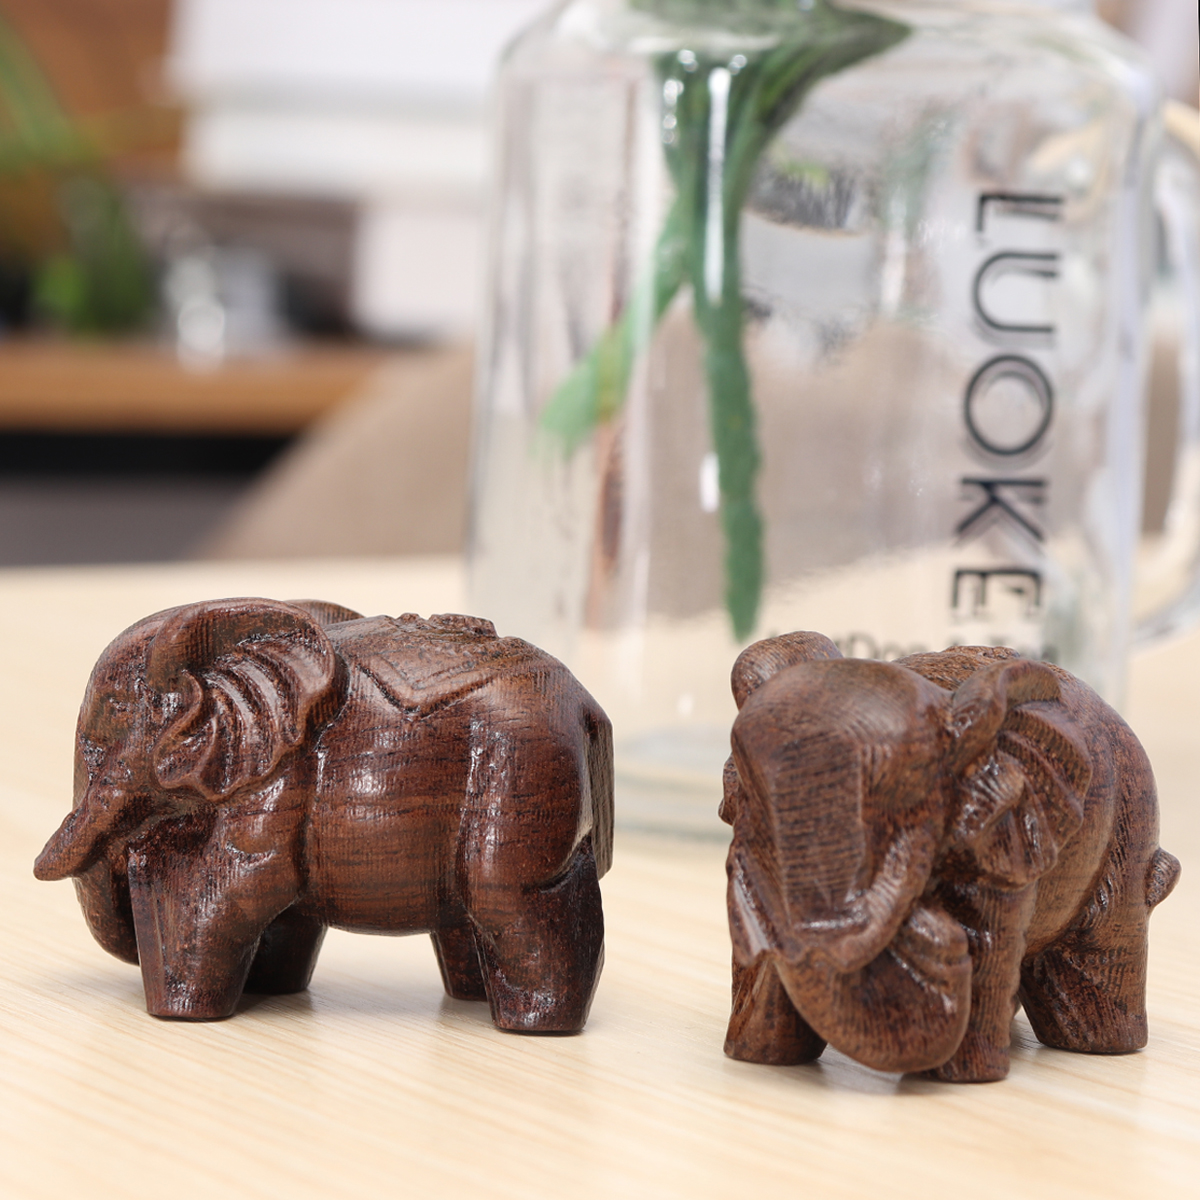 1-Pair-Natural-Agarwood-Elephant-Wood-Carving-Wood-Crafts-Retro-Decoration-Craft-Creative-Gifts-Home-1759099-10